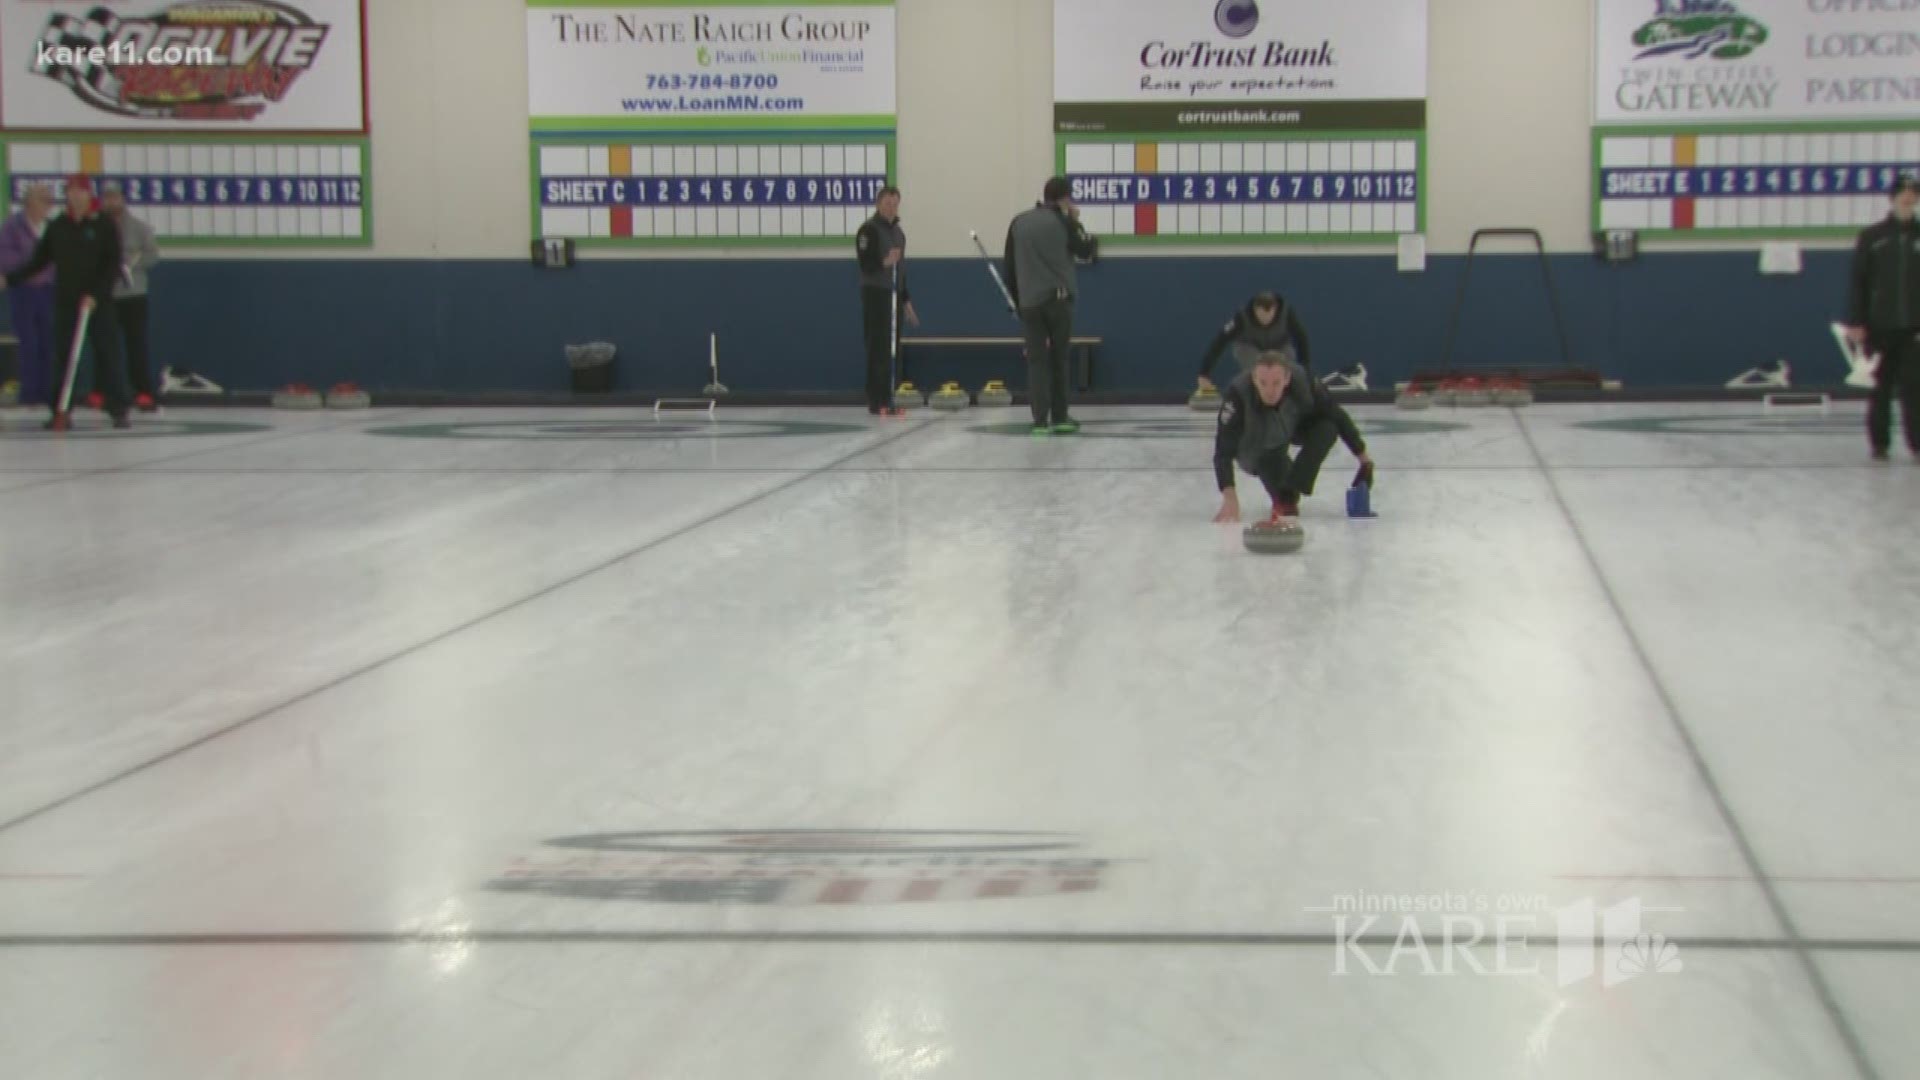 Todd Birr, a veteran of the world championships, and John Benton, a 2010 Olympian - both employees at the Four Seasons curling center in Blaine - had the idea to make one more run for the Olympics - together. http://kare11.tv/2iXtbDA